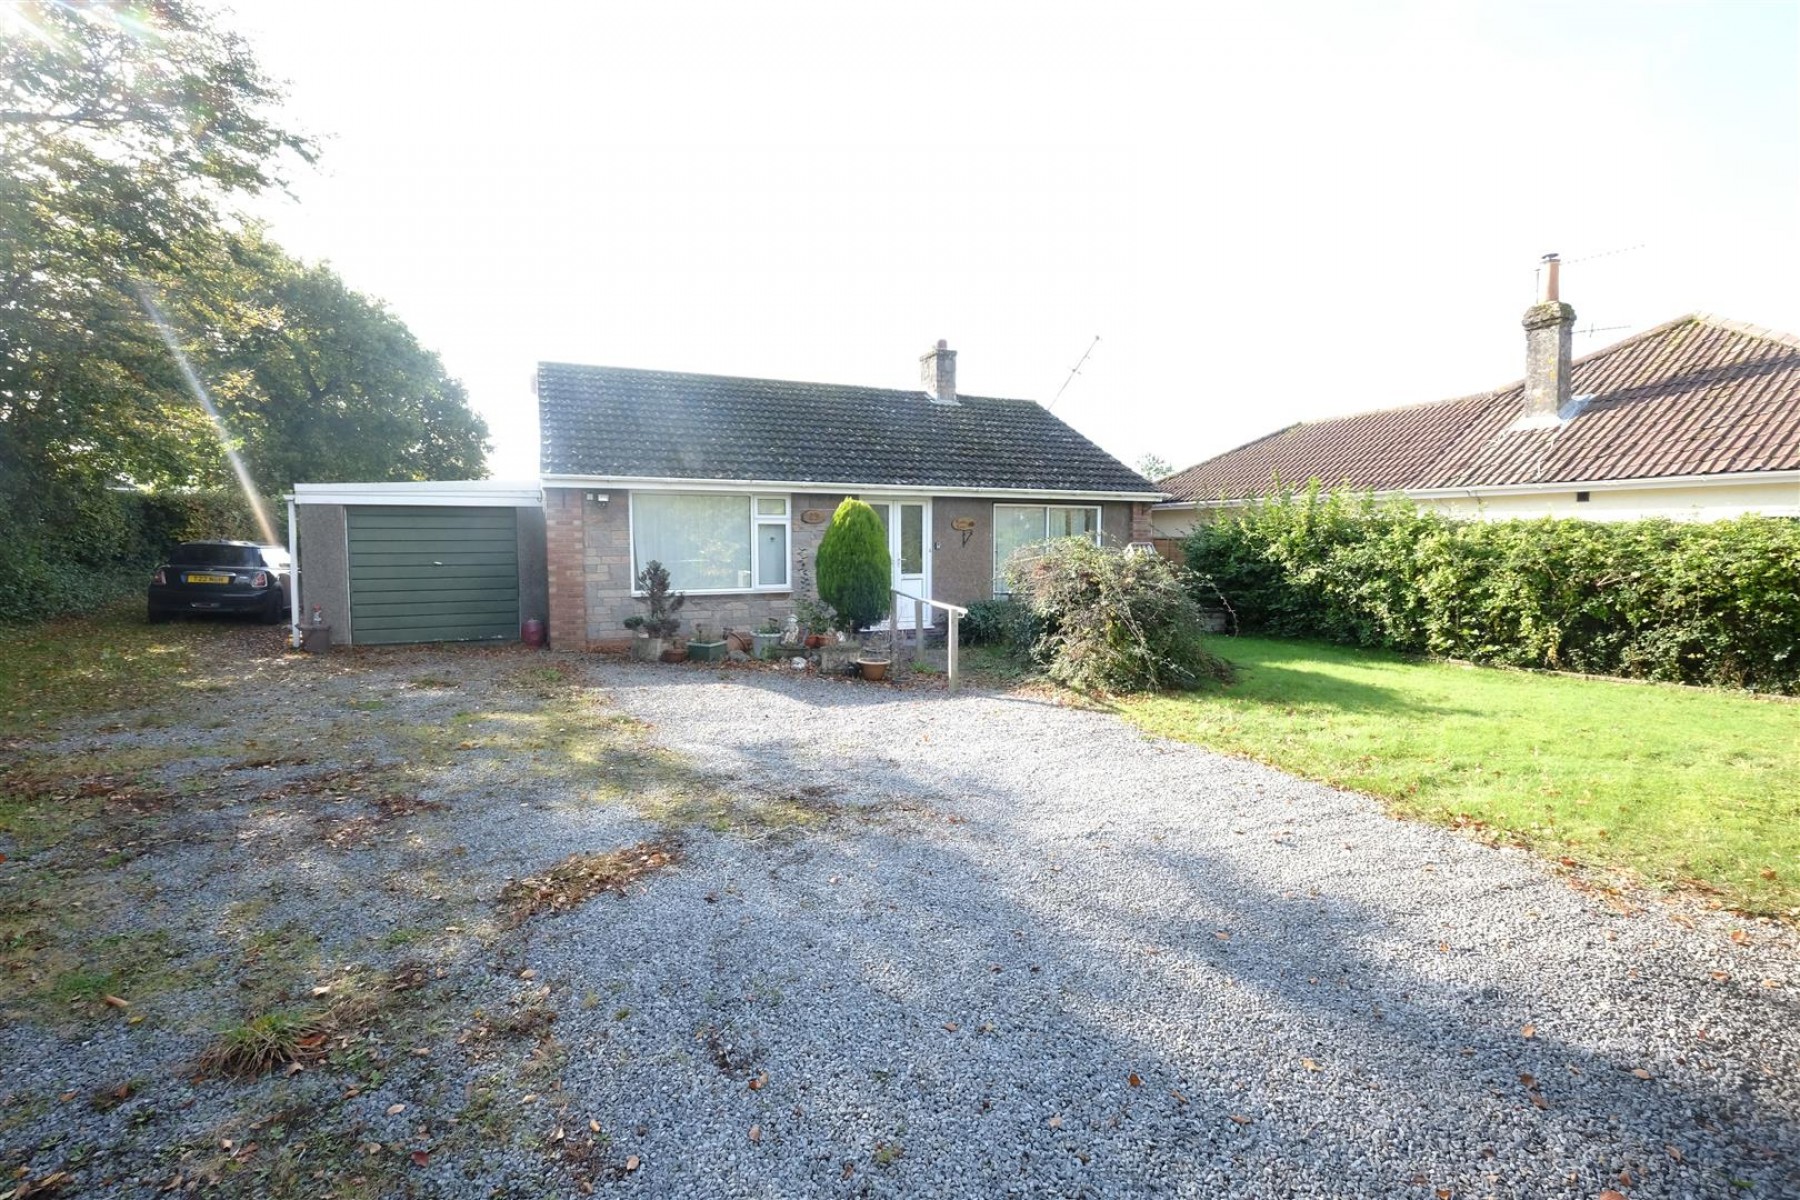 Images for BUNGALOW ON LARGE PLOT - BACKWELL